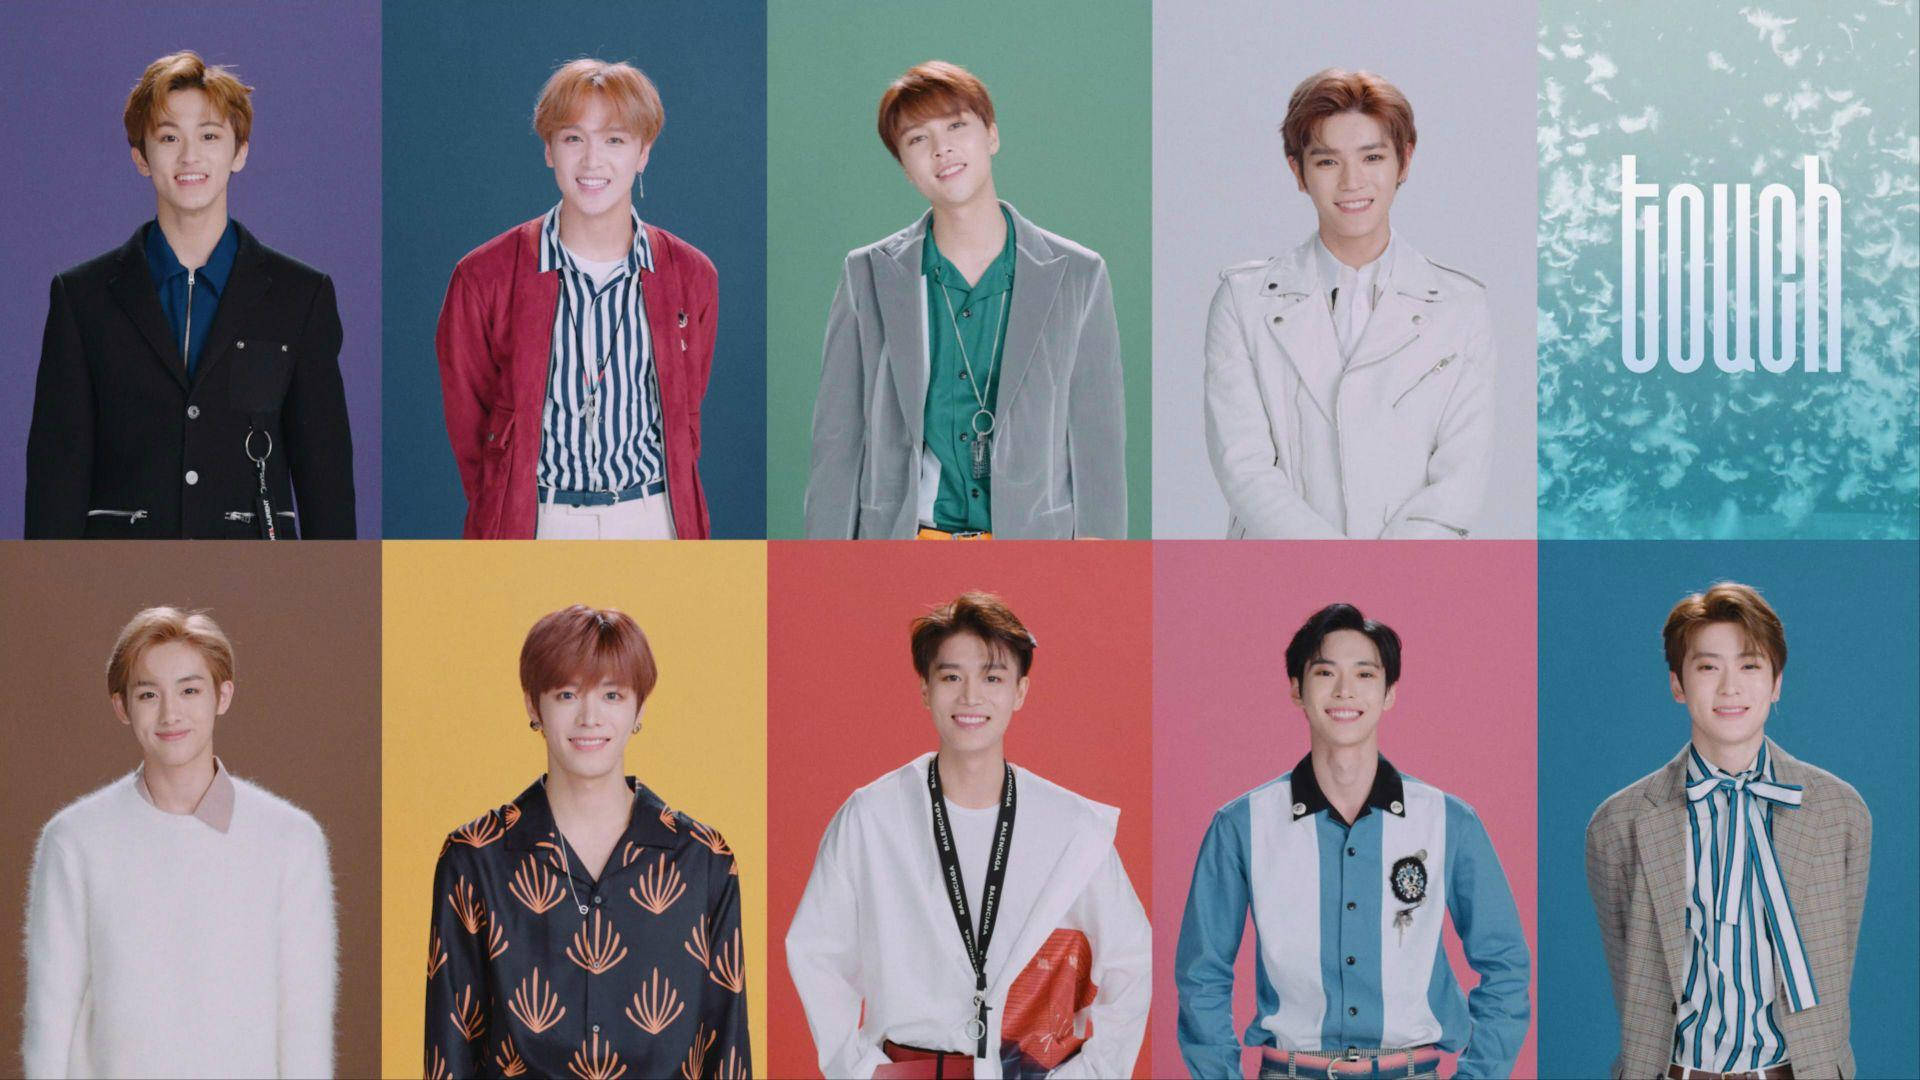 Nct 127 'touch